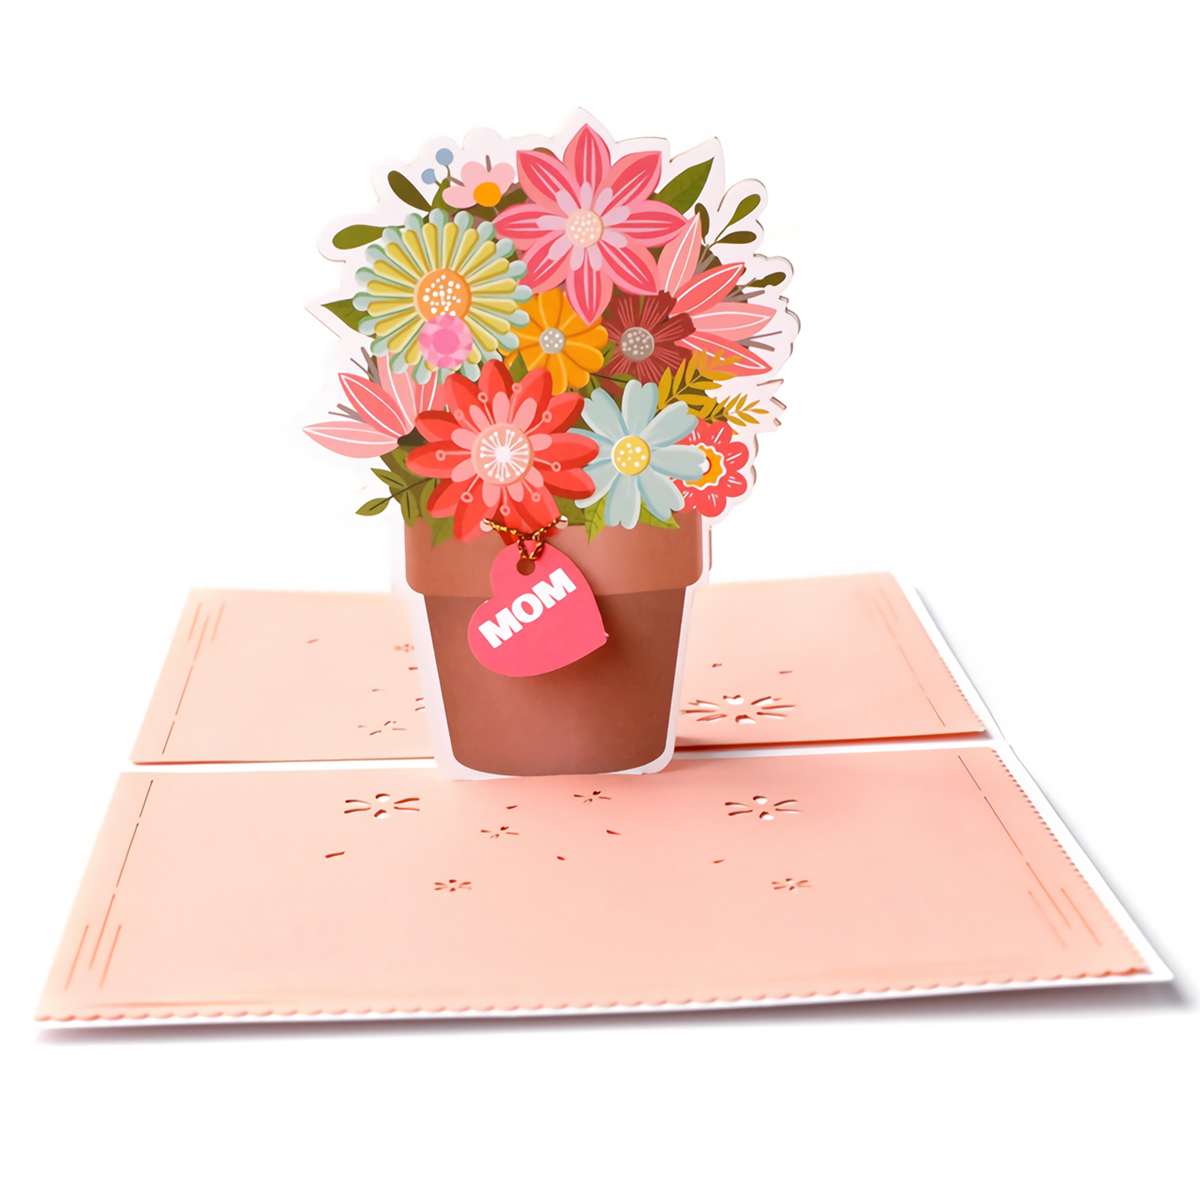 3D-Mothers-Day-Cards-Best-Mom-Flower-Basket-Paper-Invitation-Greeting-Cards-Anniversary-Birthday-Car-1667689-3